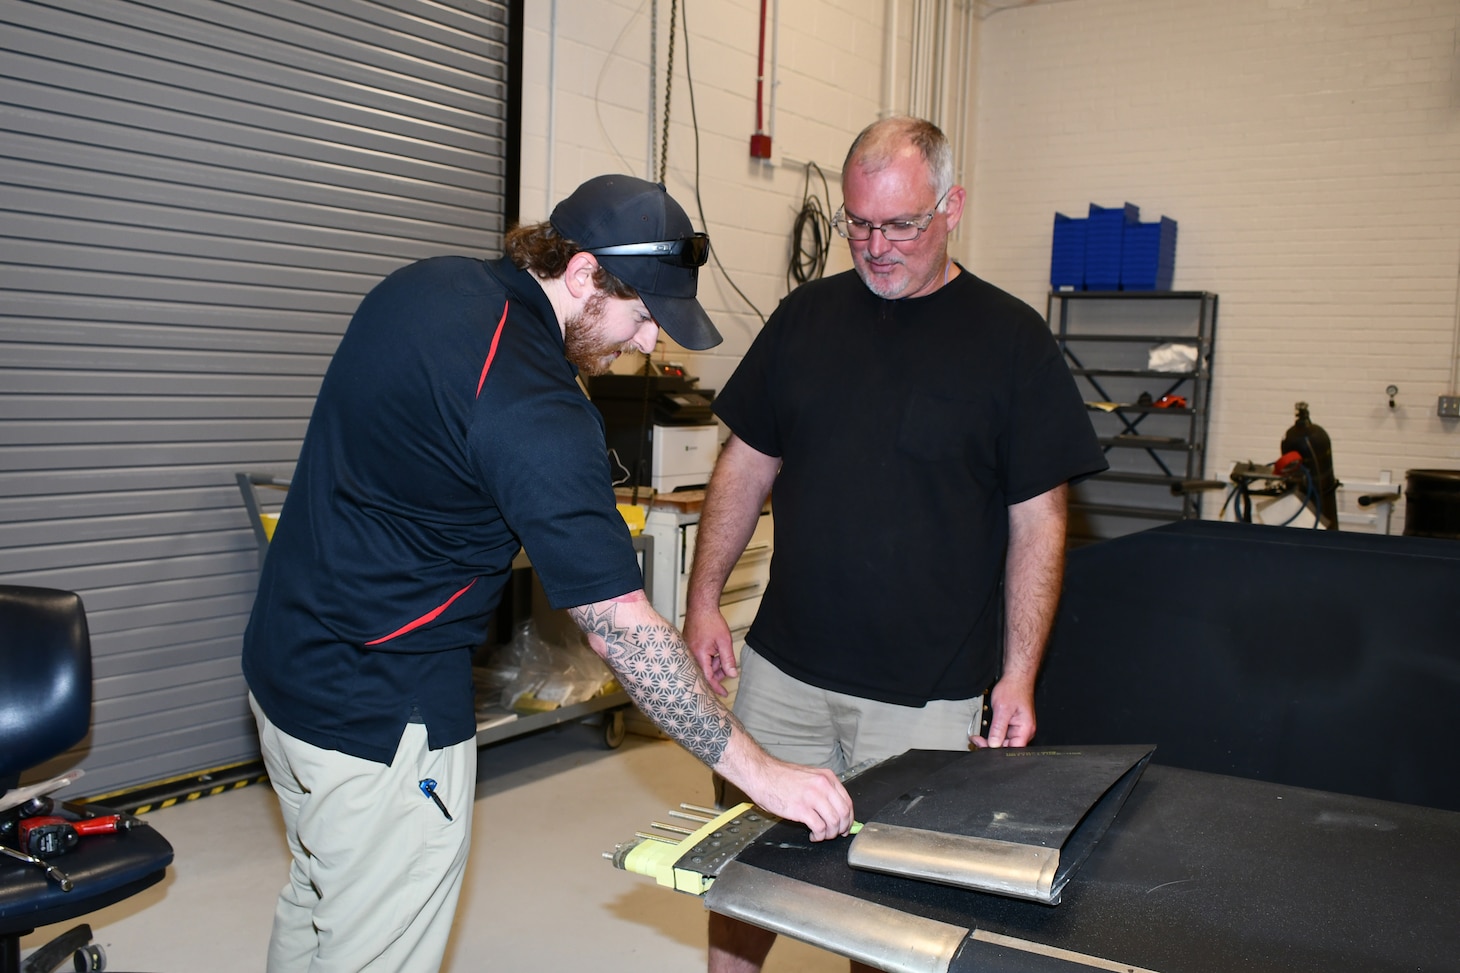 Joshua Peedin, left, senior rotor systems engineer for the H-53 Fleet Support Team, and Robert Call, work leader for the dynamic components shop, inspect the weights used to balance an H-53E rotor blade. Fleet Readiness Center East uses the universal static balance fixture to balance rotor and tail blades for the H-53E, V-22 and H-1 helicopters, and the H-53K program plans to use the fixture to balance its blades as well.